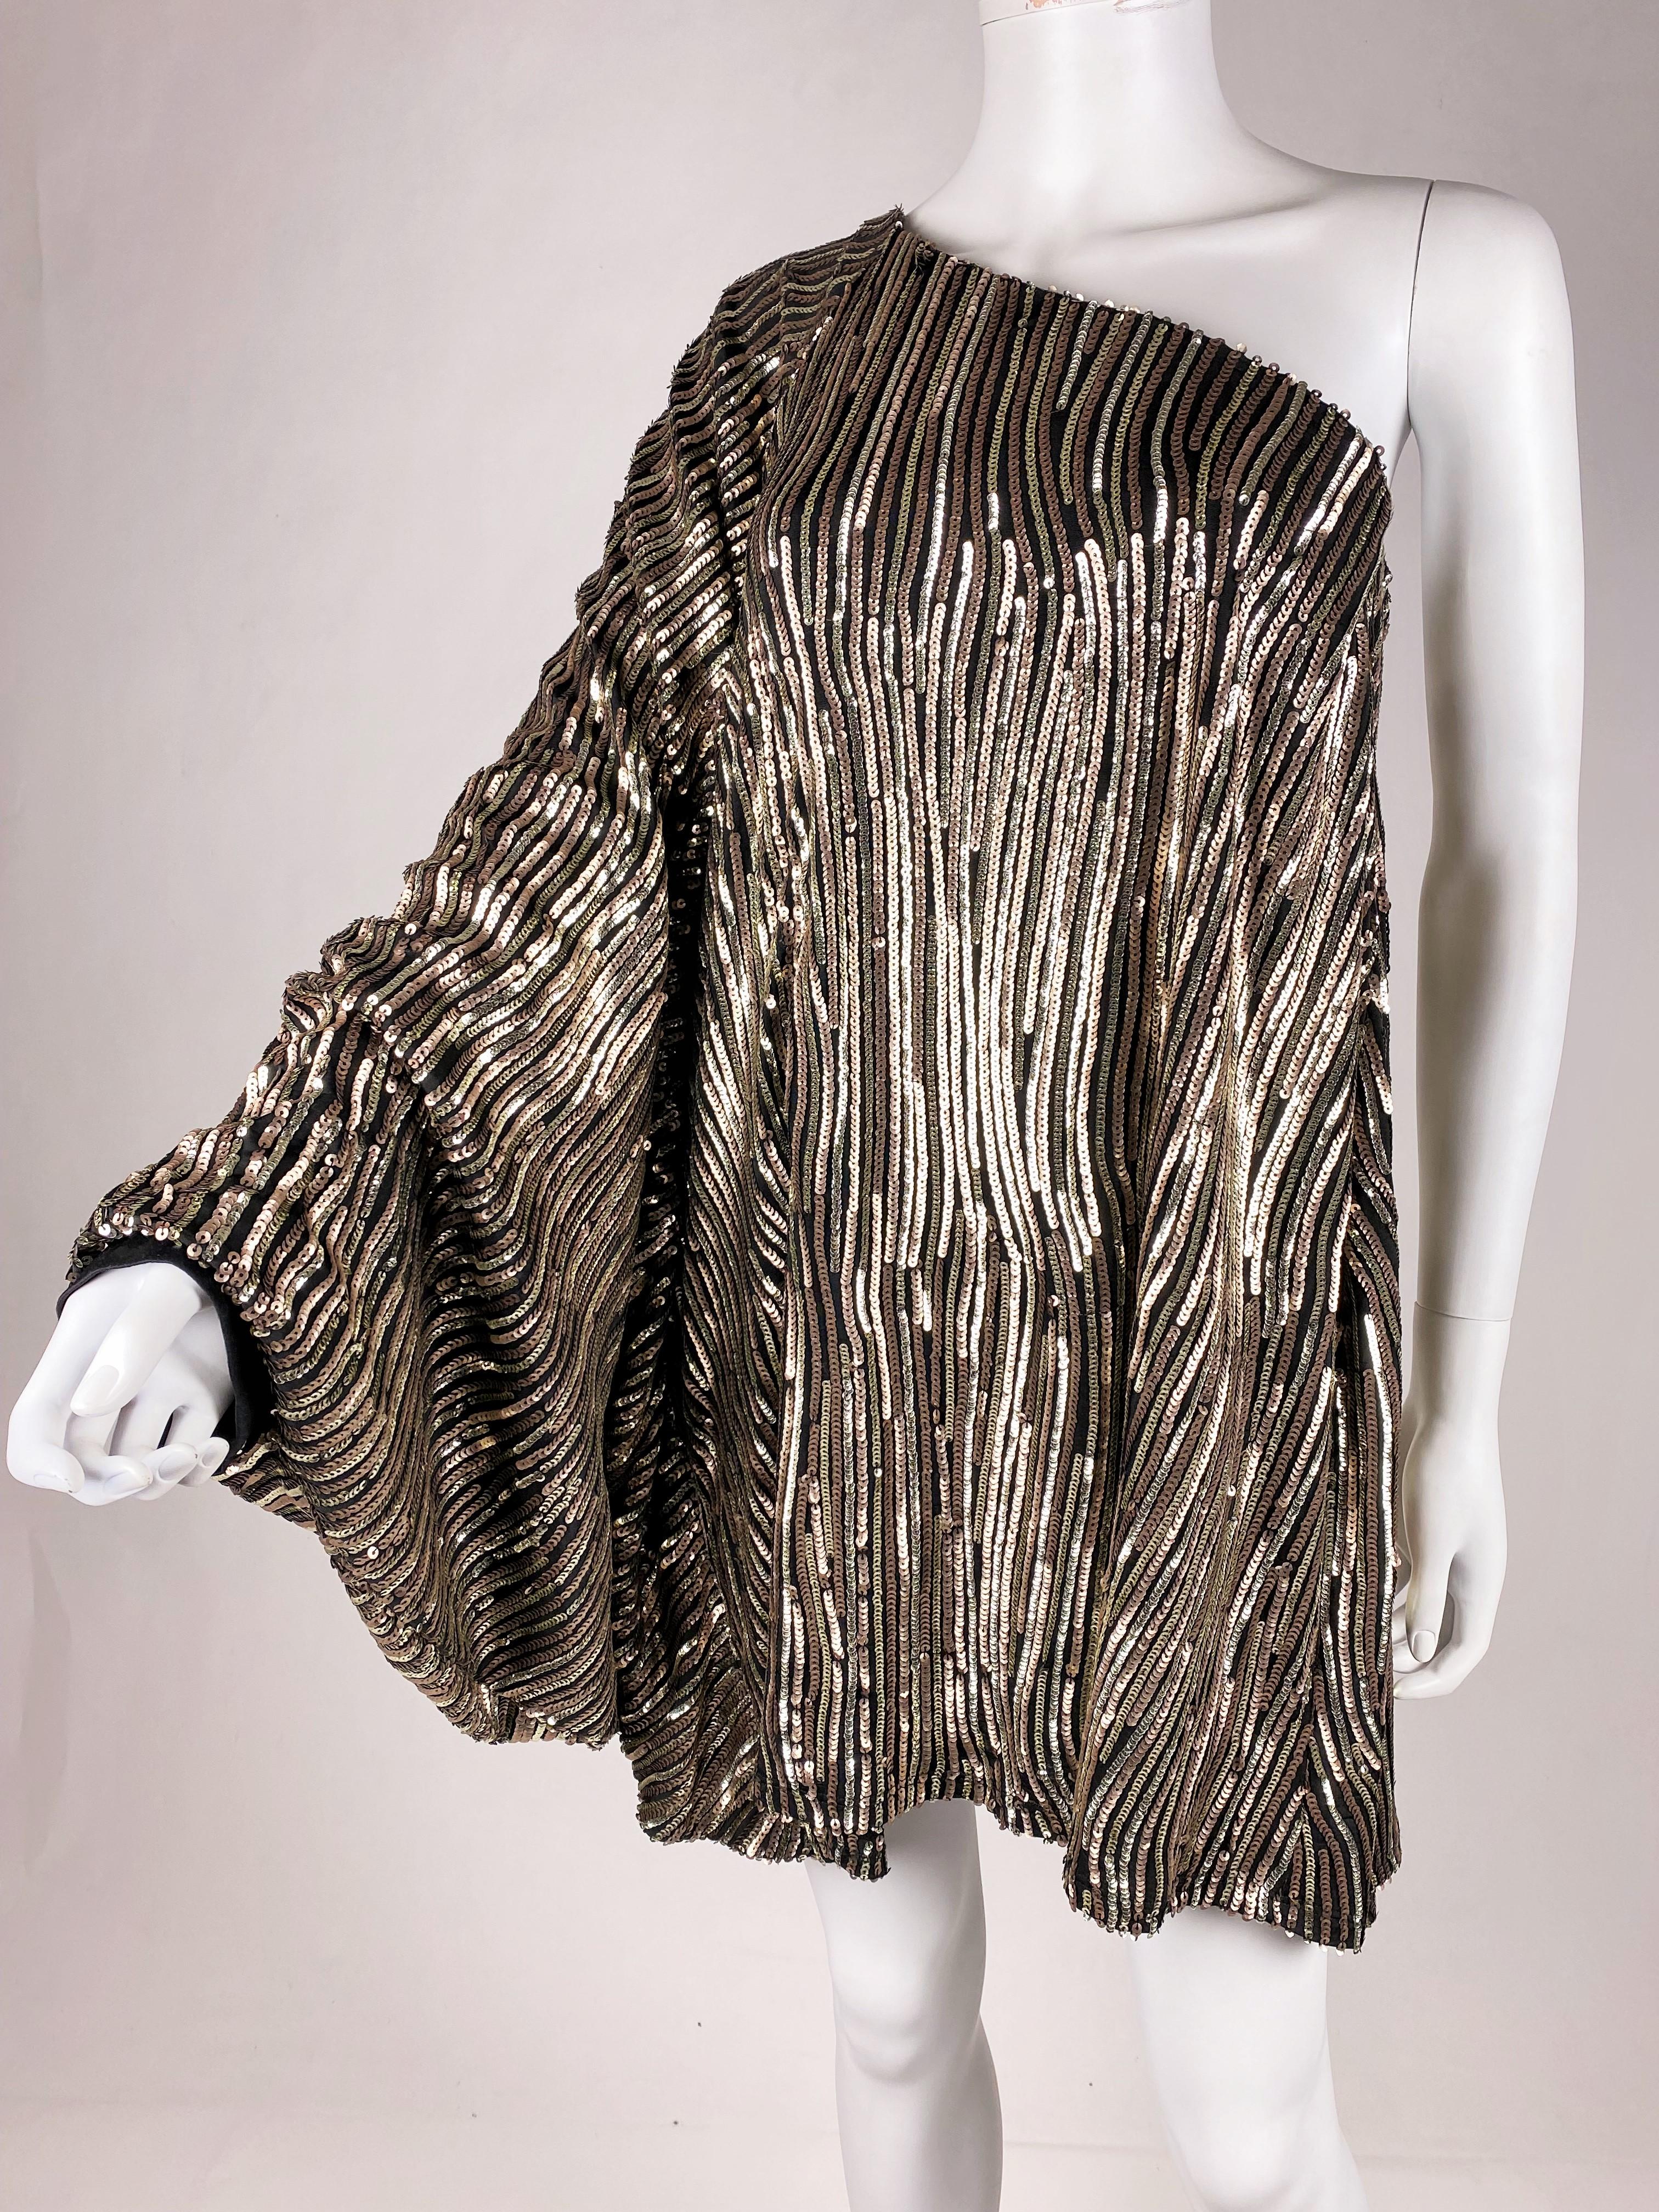 A Sequin top or mini-dress with bat handle For a Party - France Circa 1980 For Sale 5